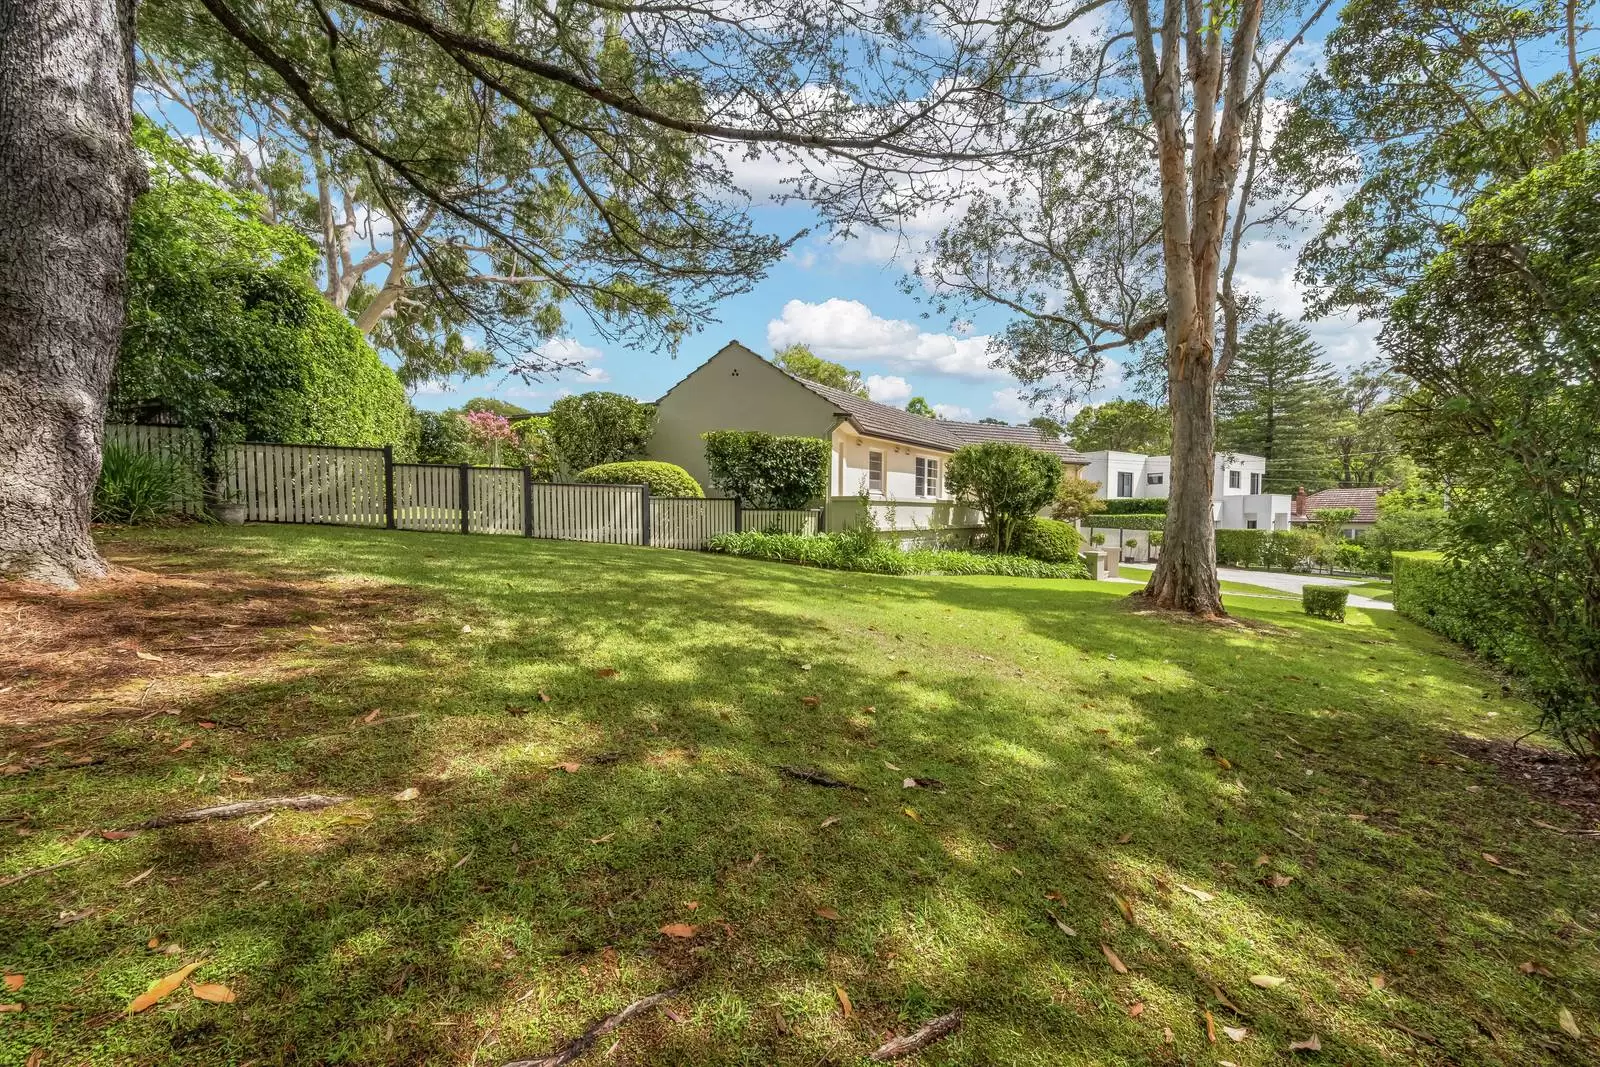 Photo #13: 135 Highfield Road, Lindfield - Sold by Sydney Sotheby's International Realty